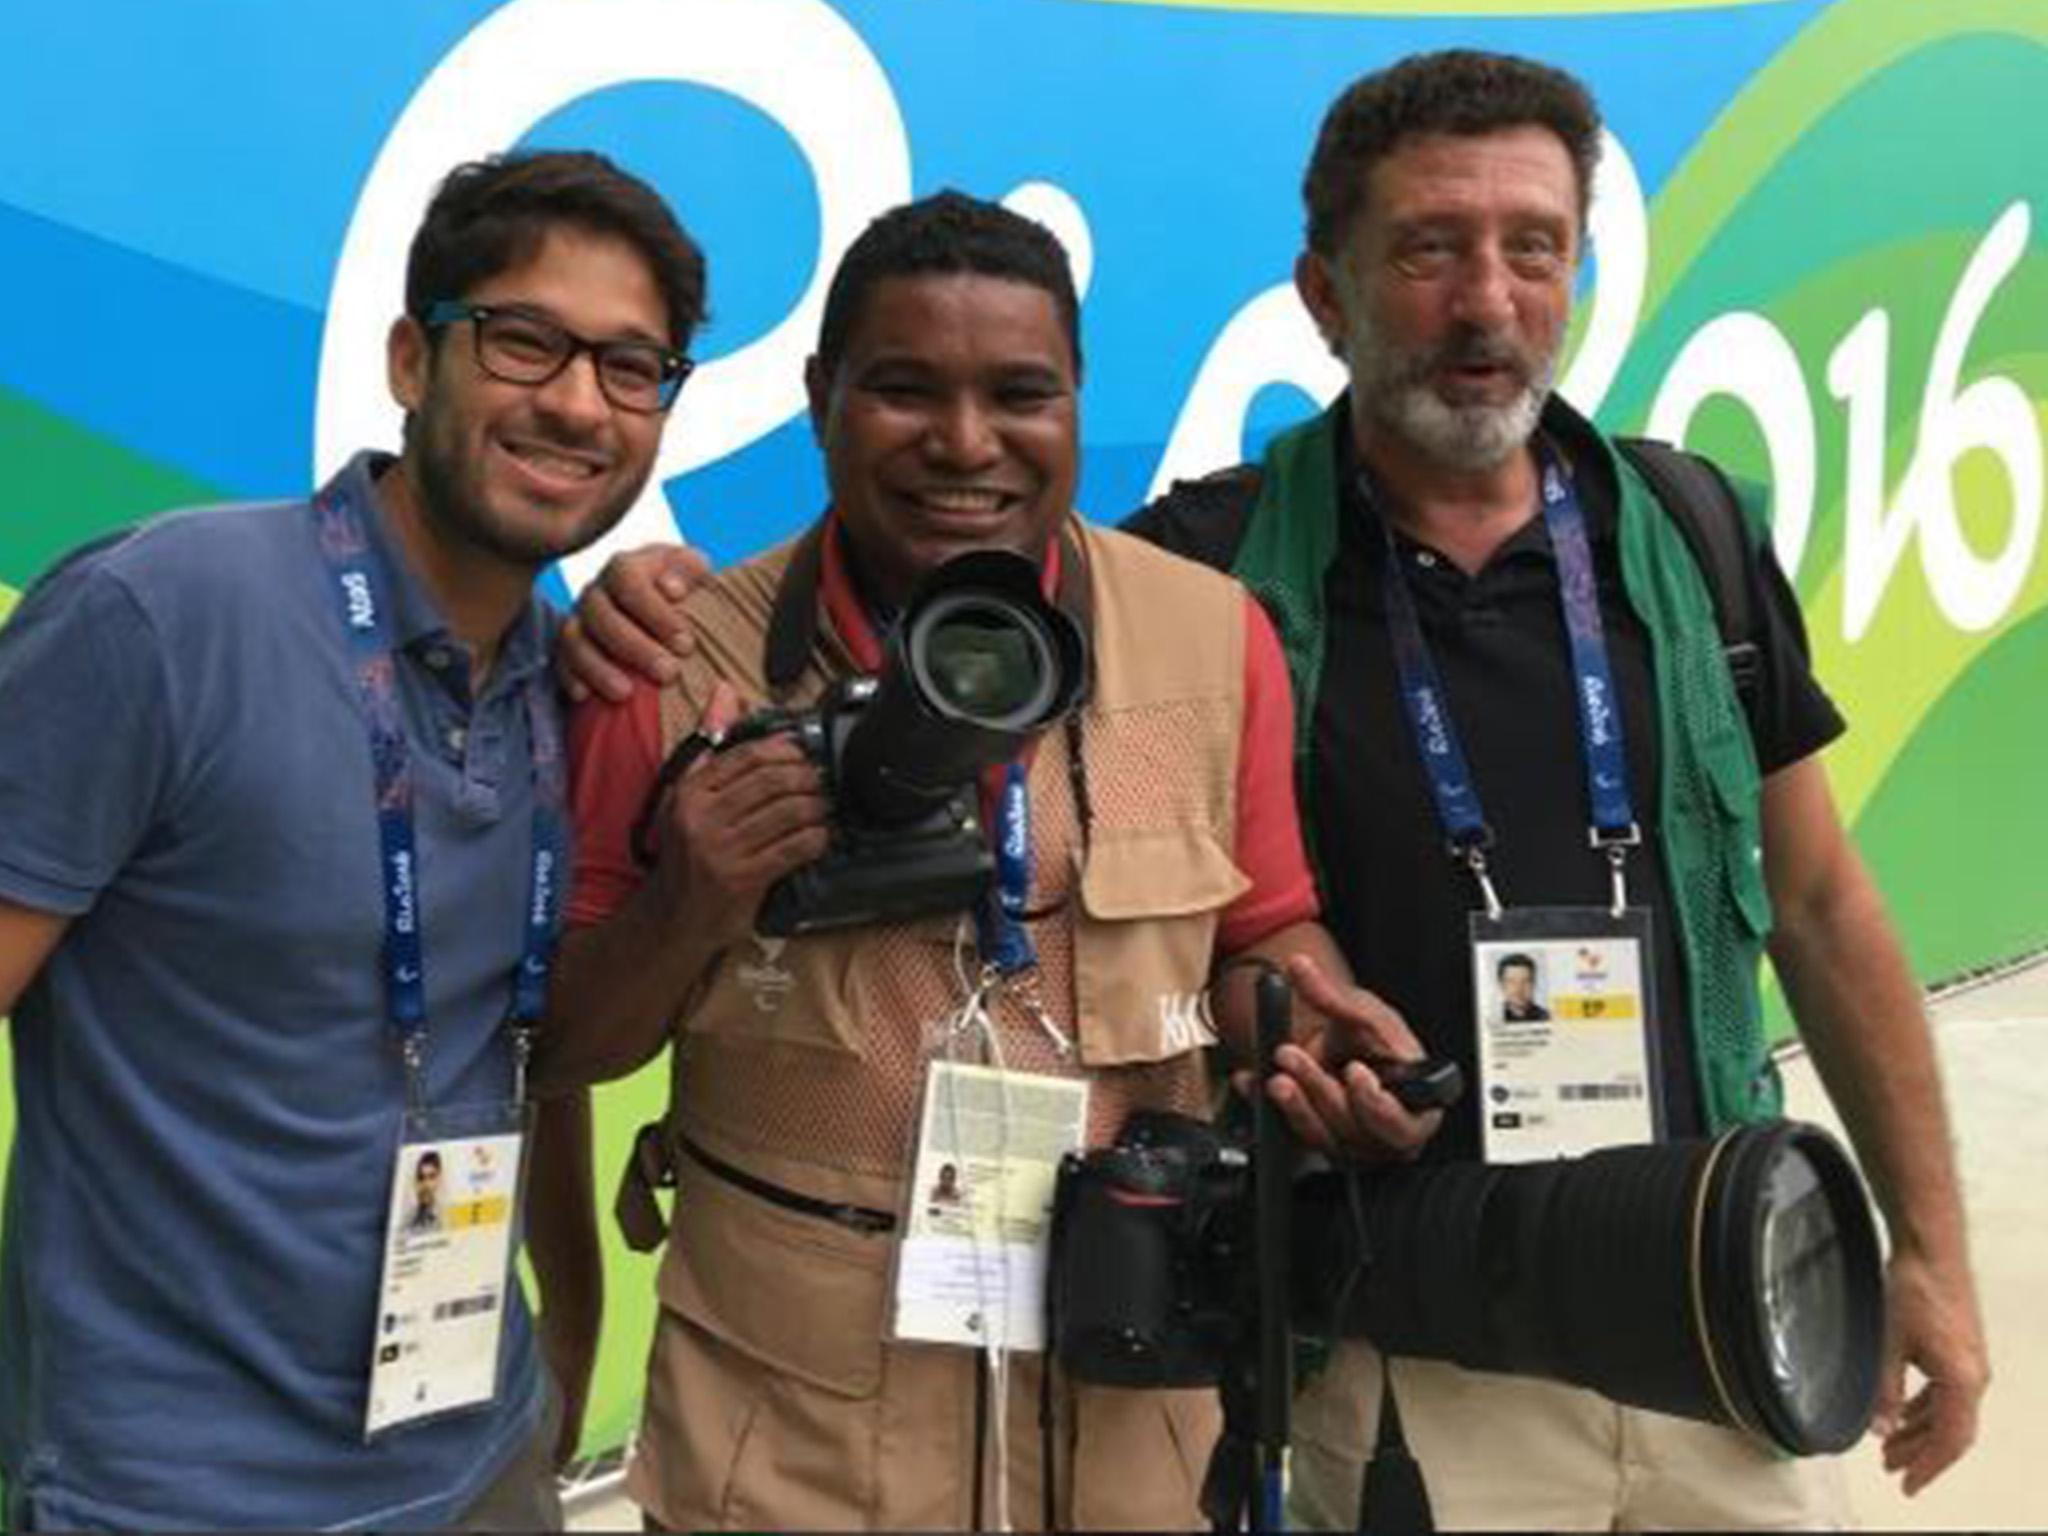 Joao Maia, centre, with his fellow photographers at the Rio Paralympics